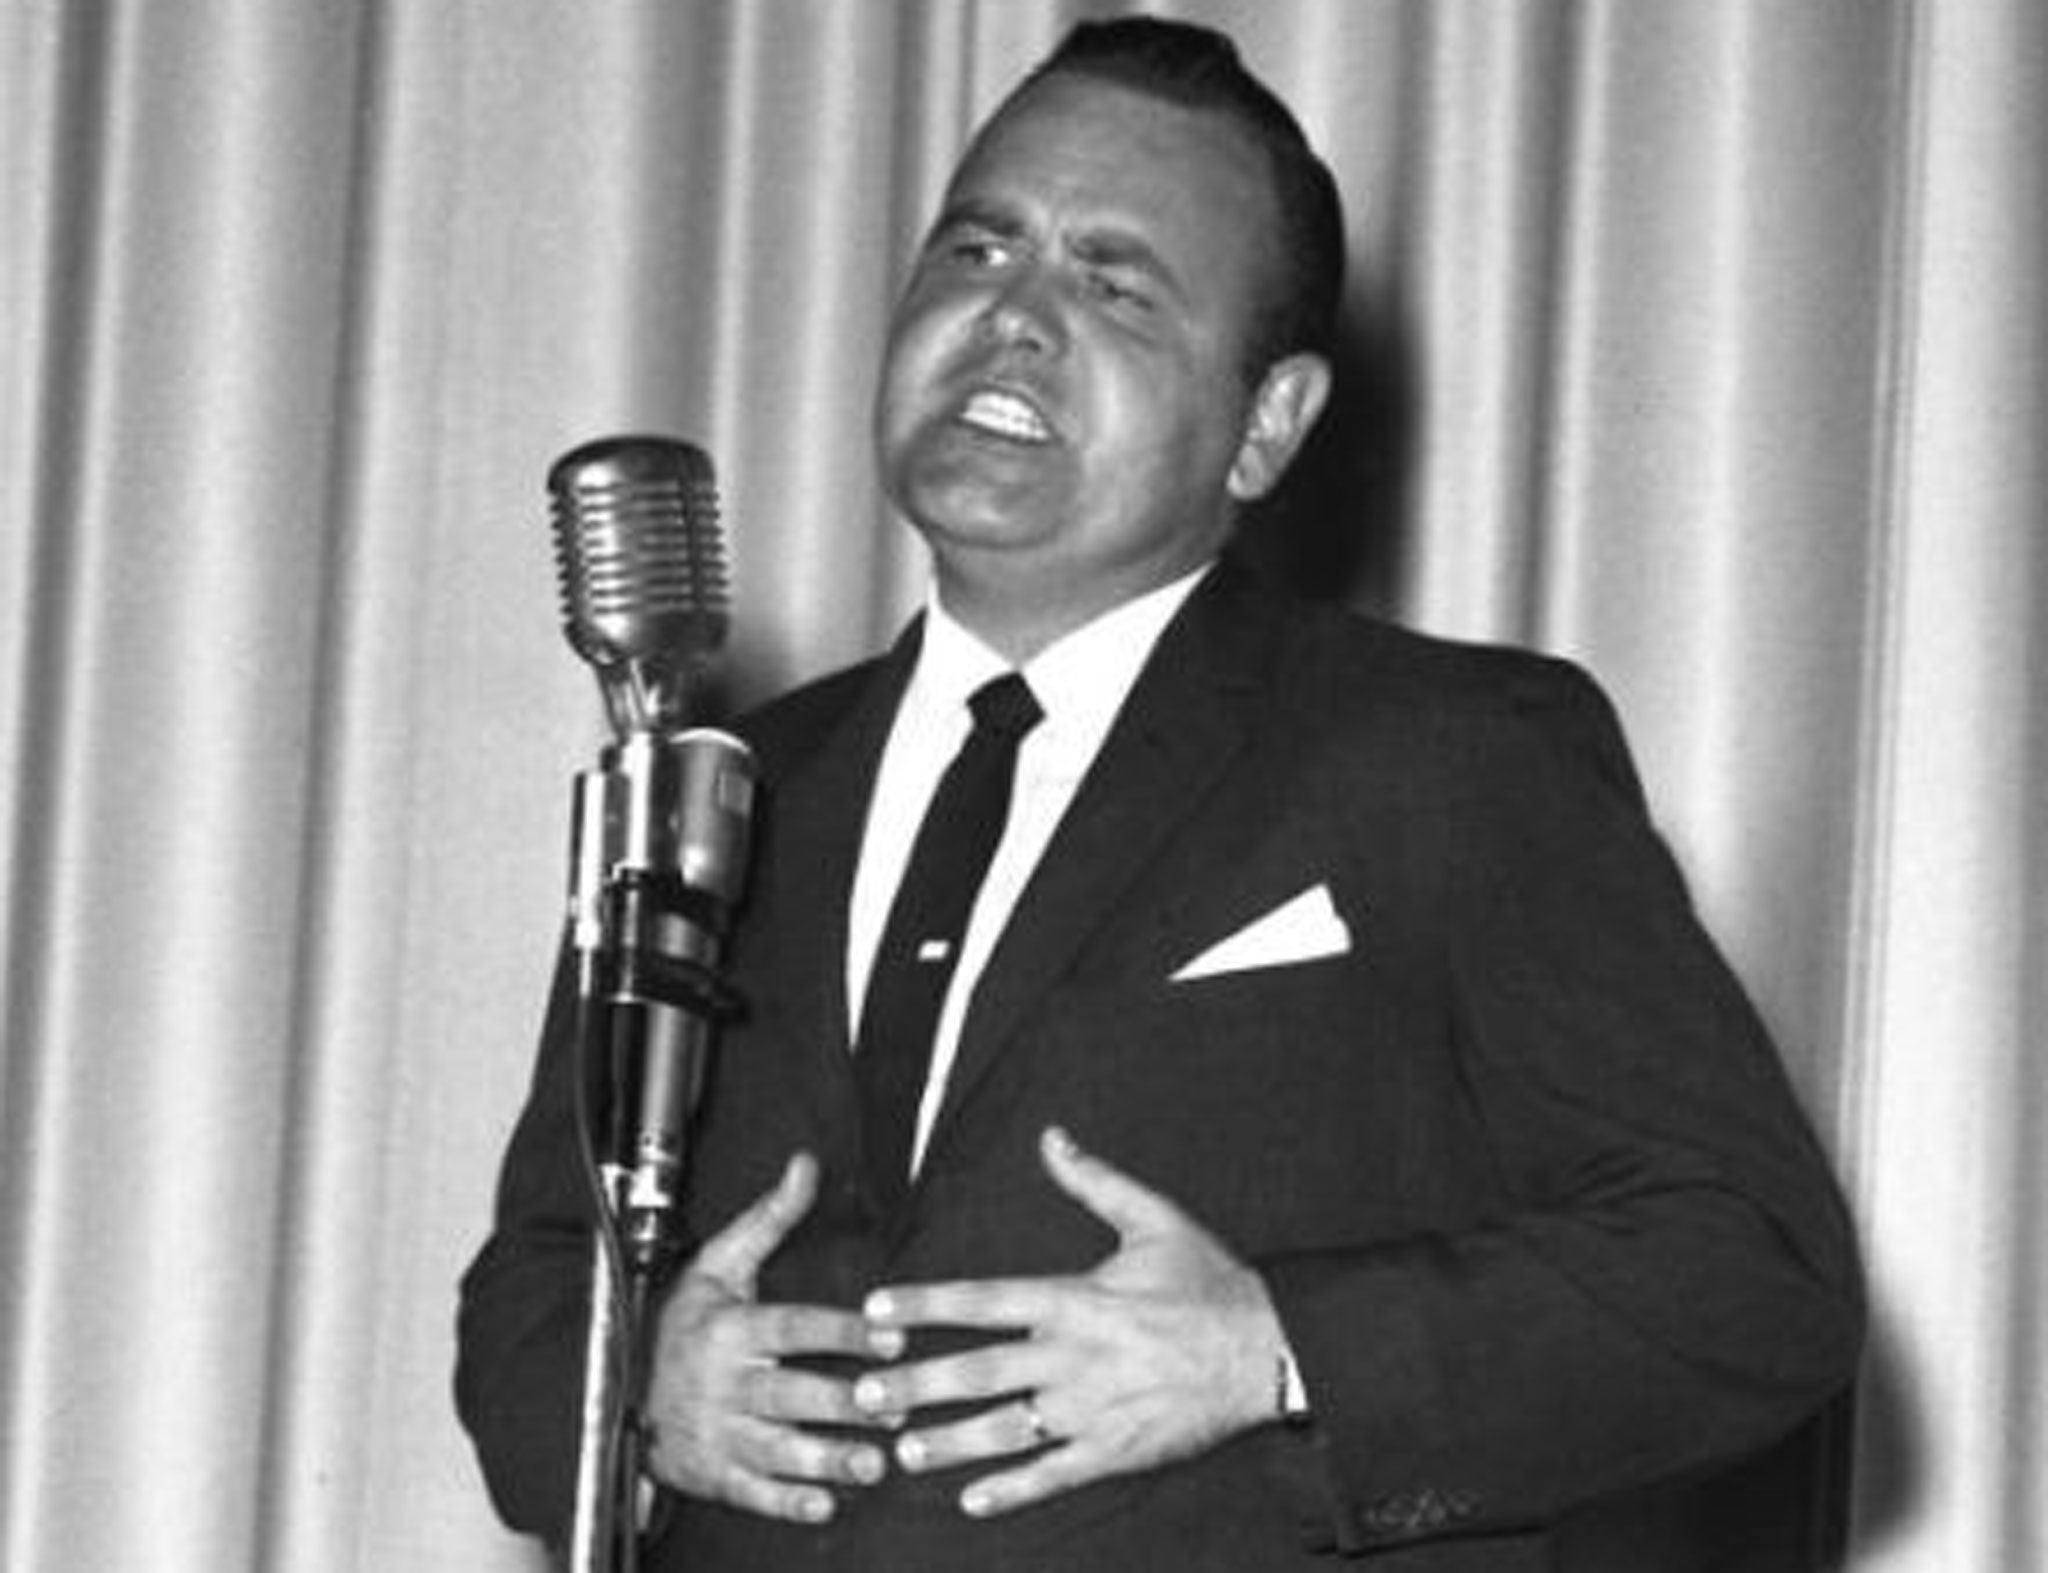 Jonathan Winters: Comedian who inspired Carrey and Williams